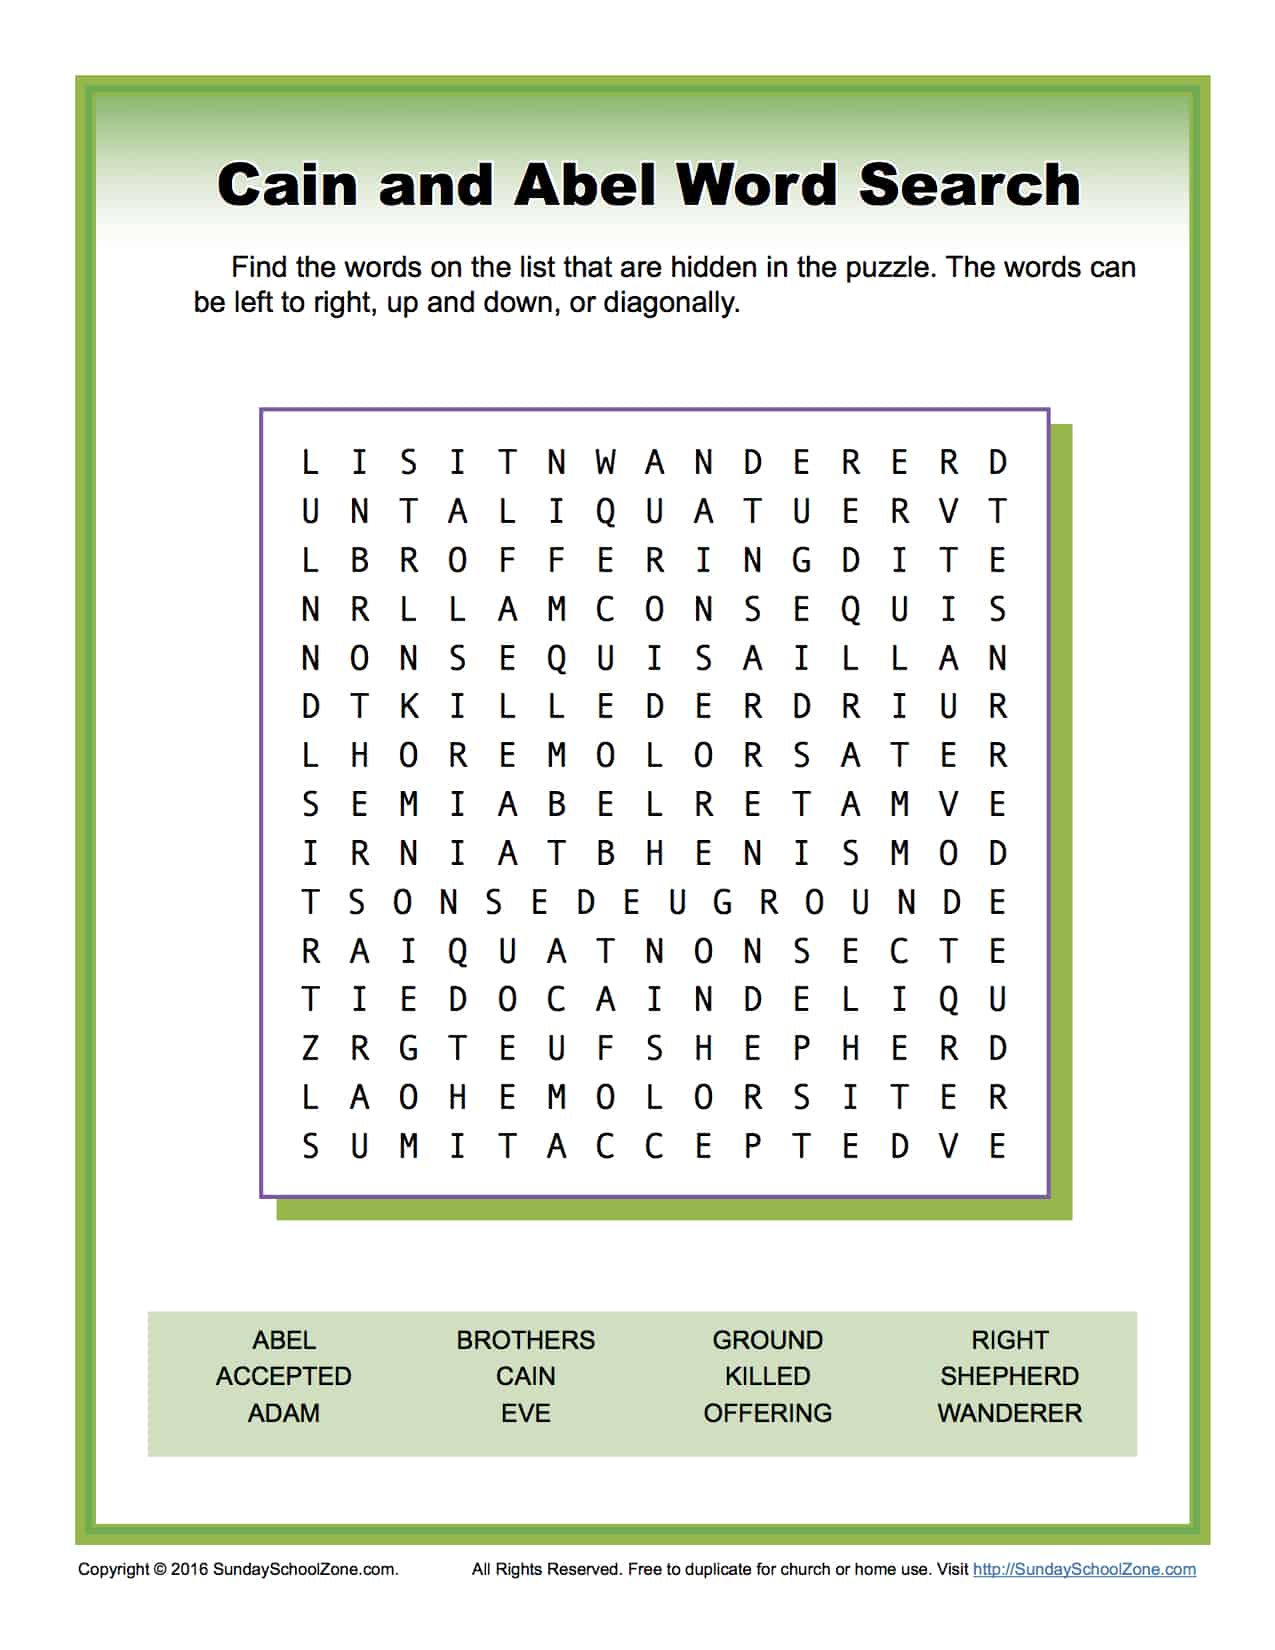 Cain and Abel Word Search - Children's Bible Activities | Sunday School